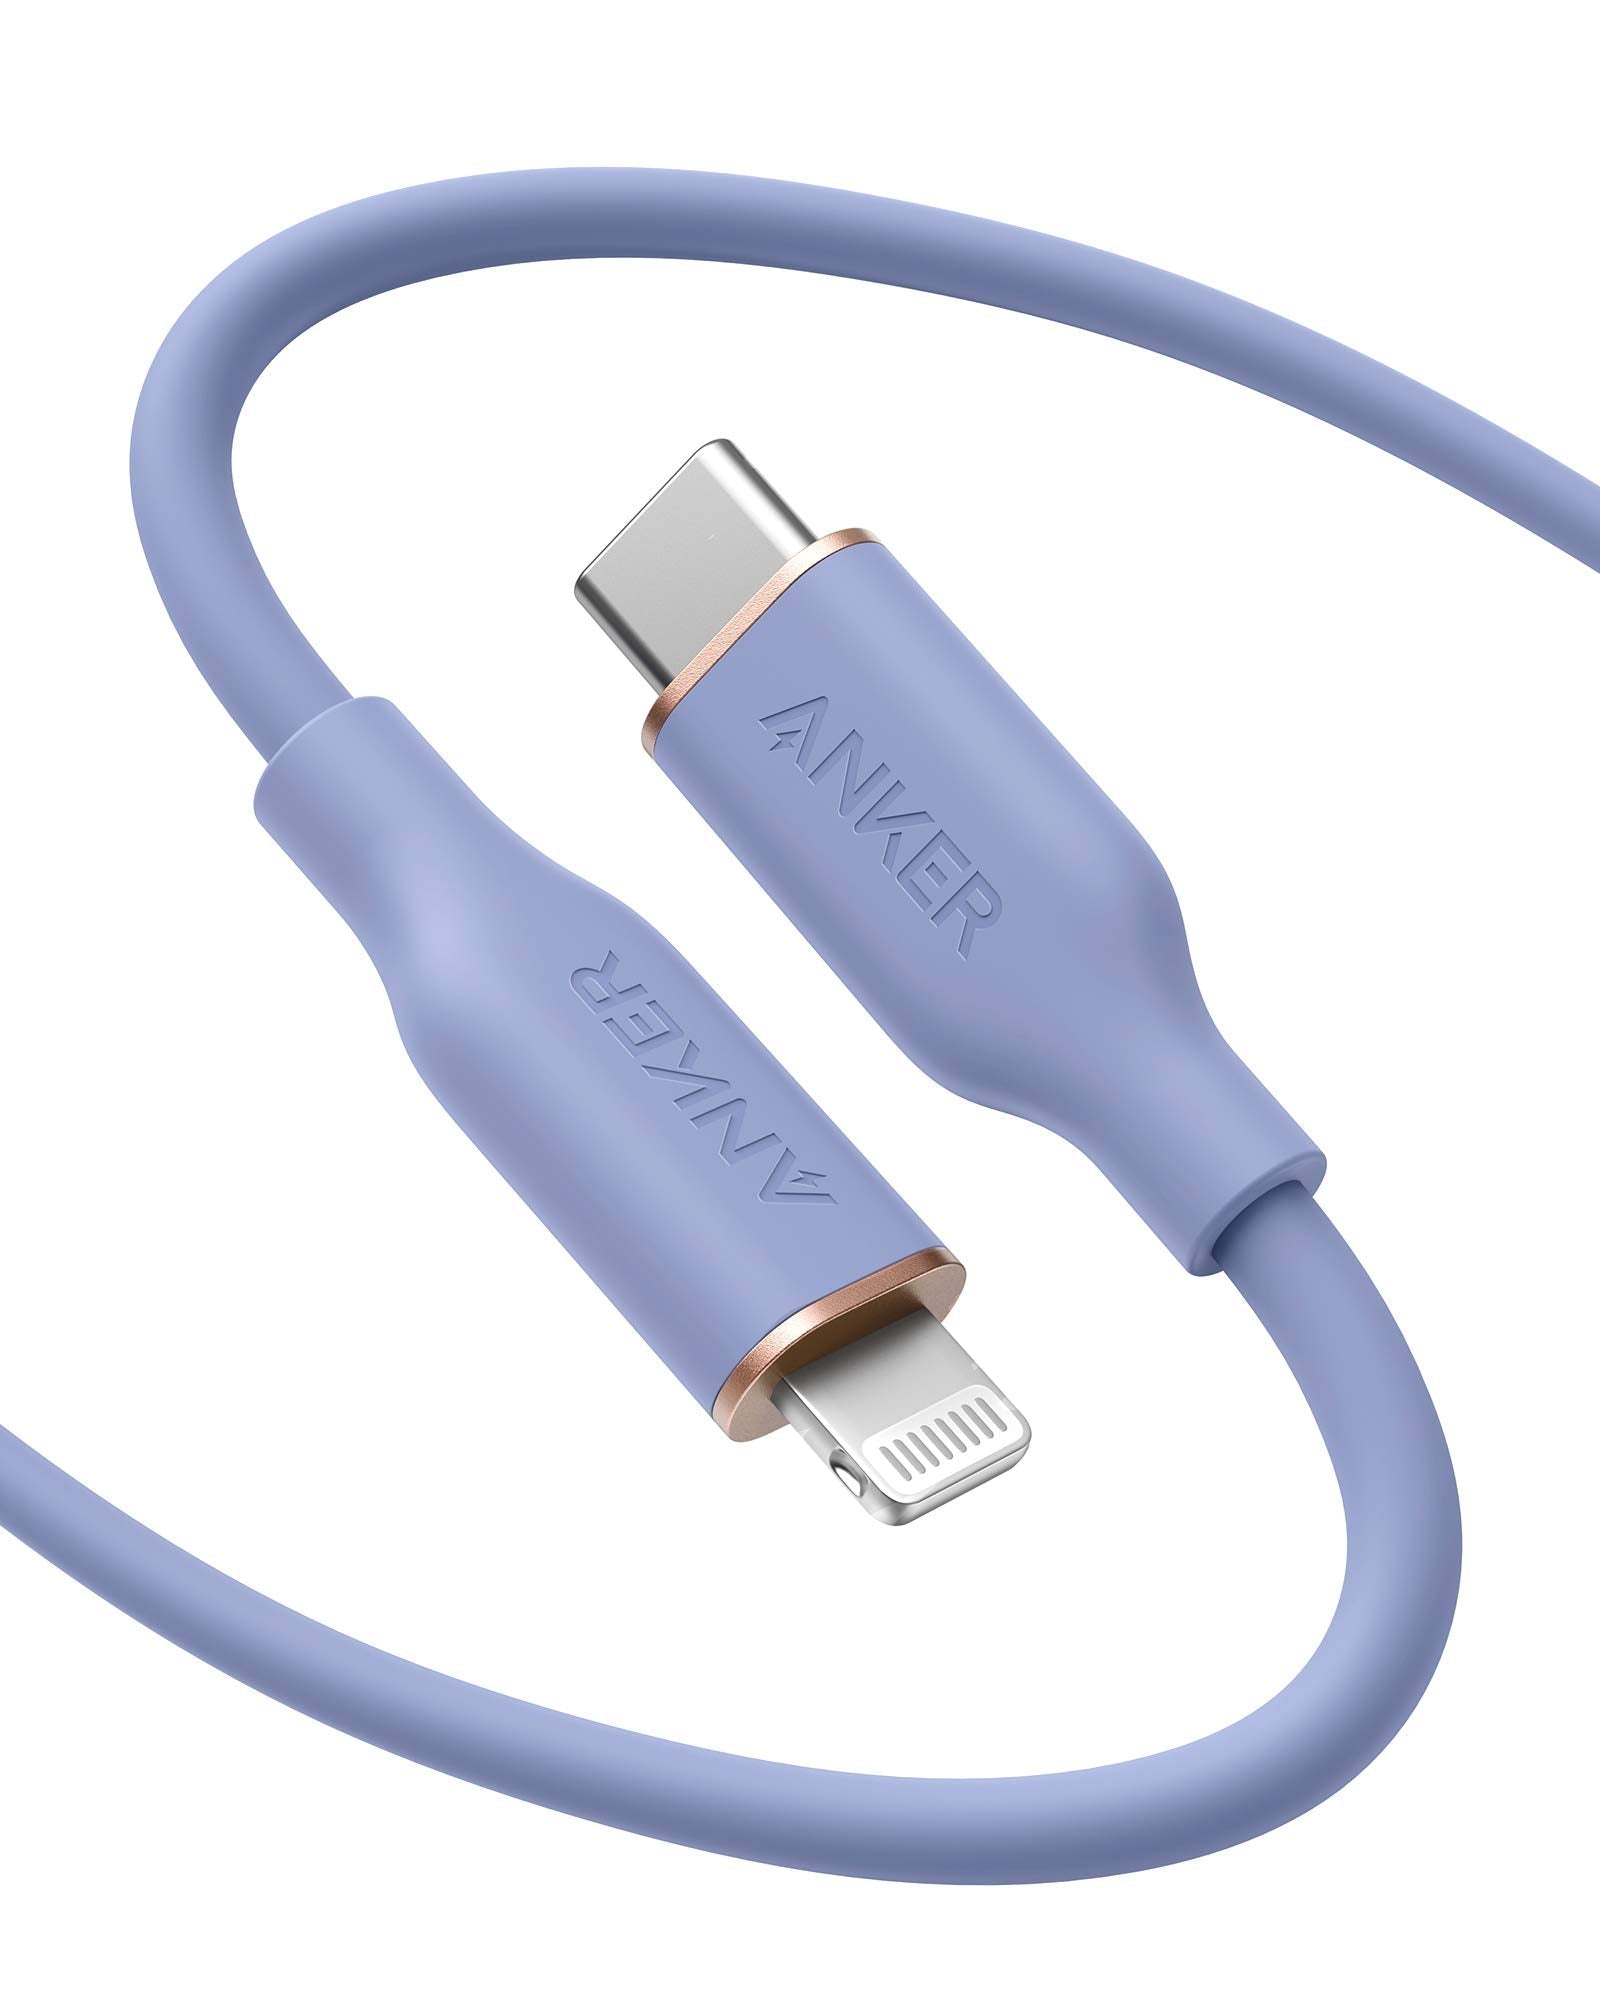 Anker 641 USB-C to Lightning Cable (Flow, Silicone) - Anker US